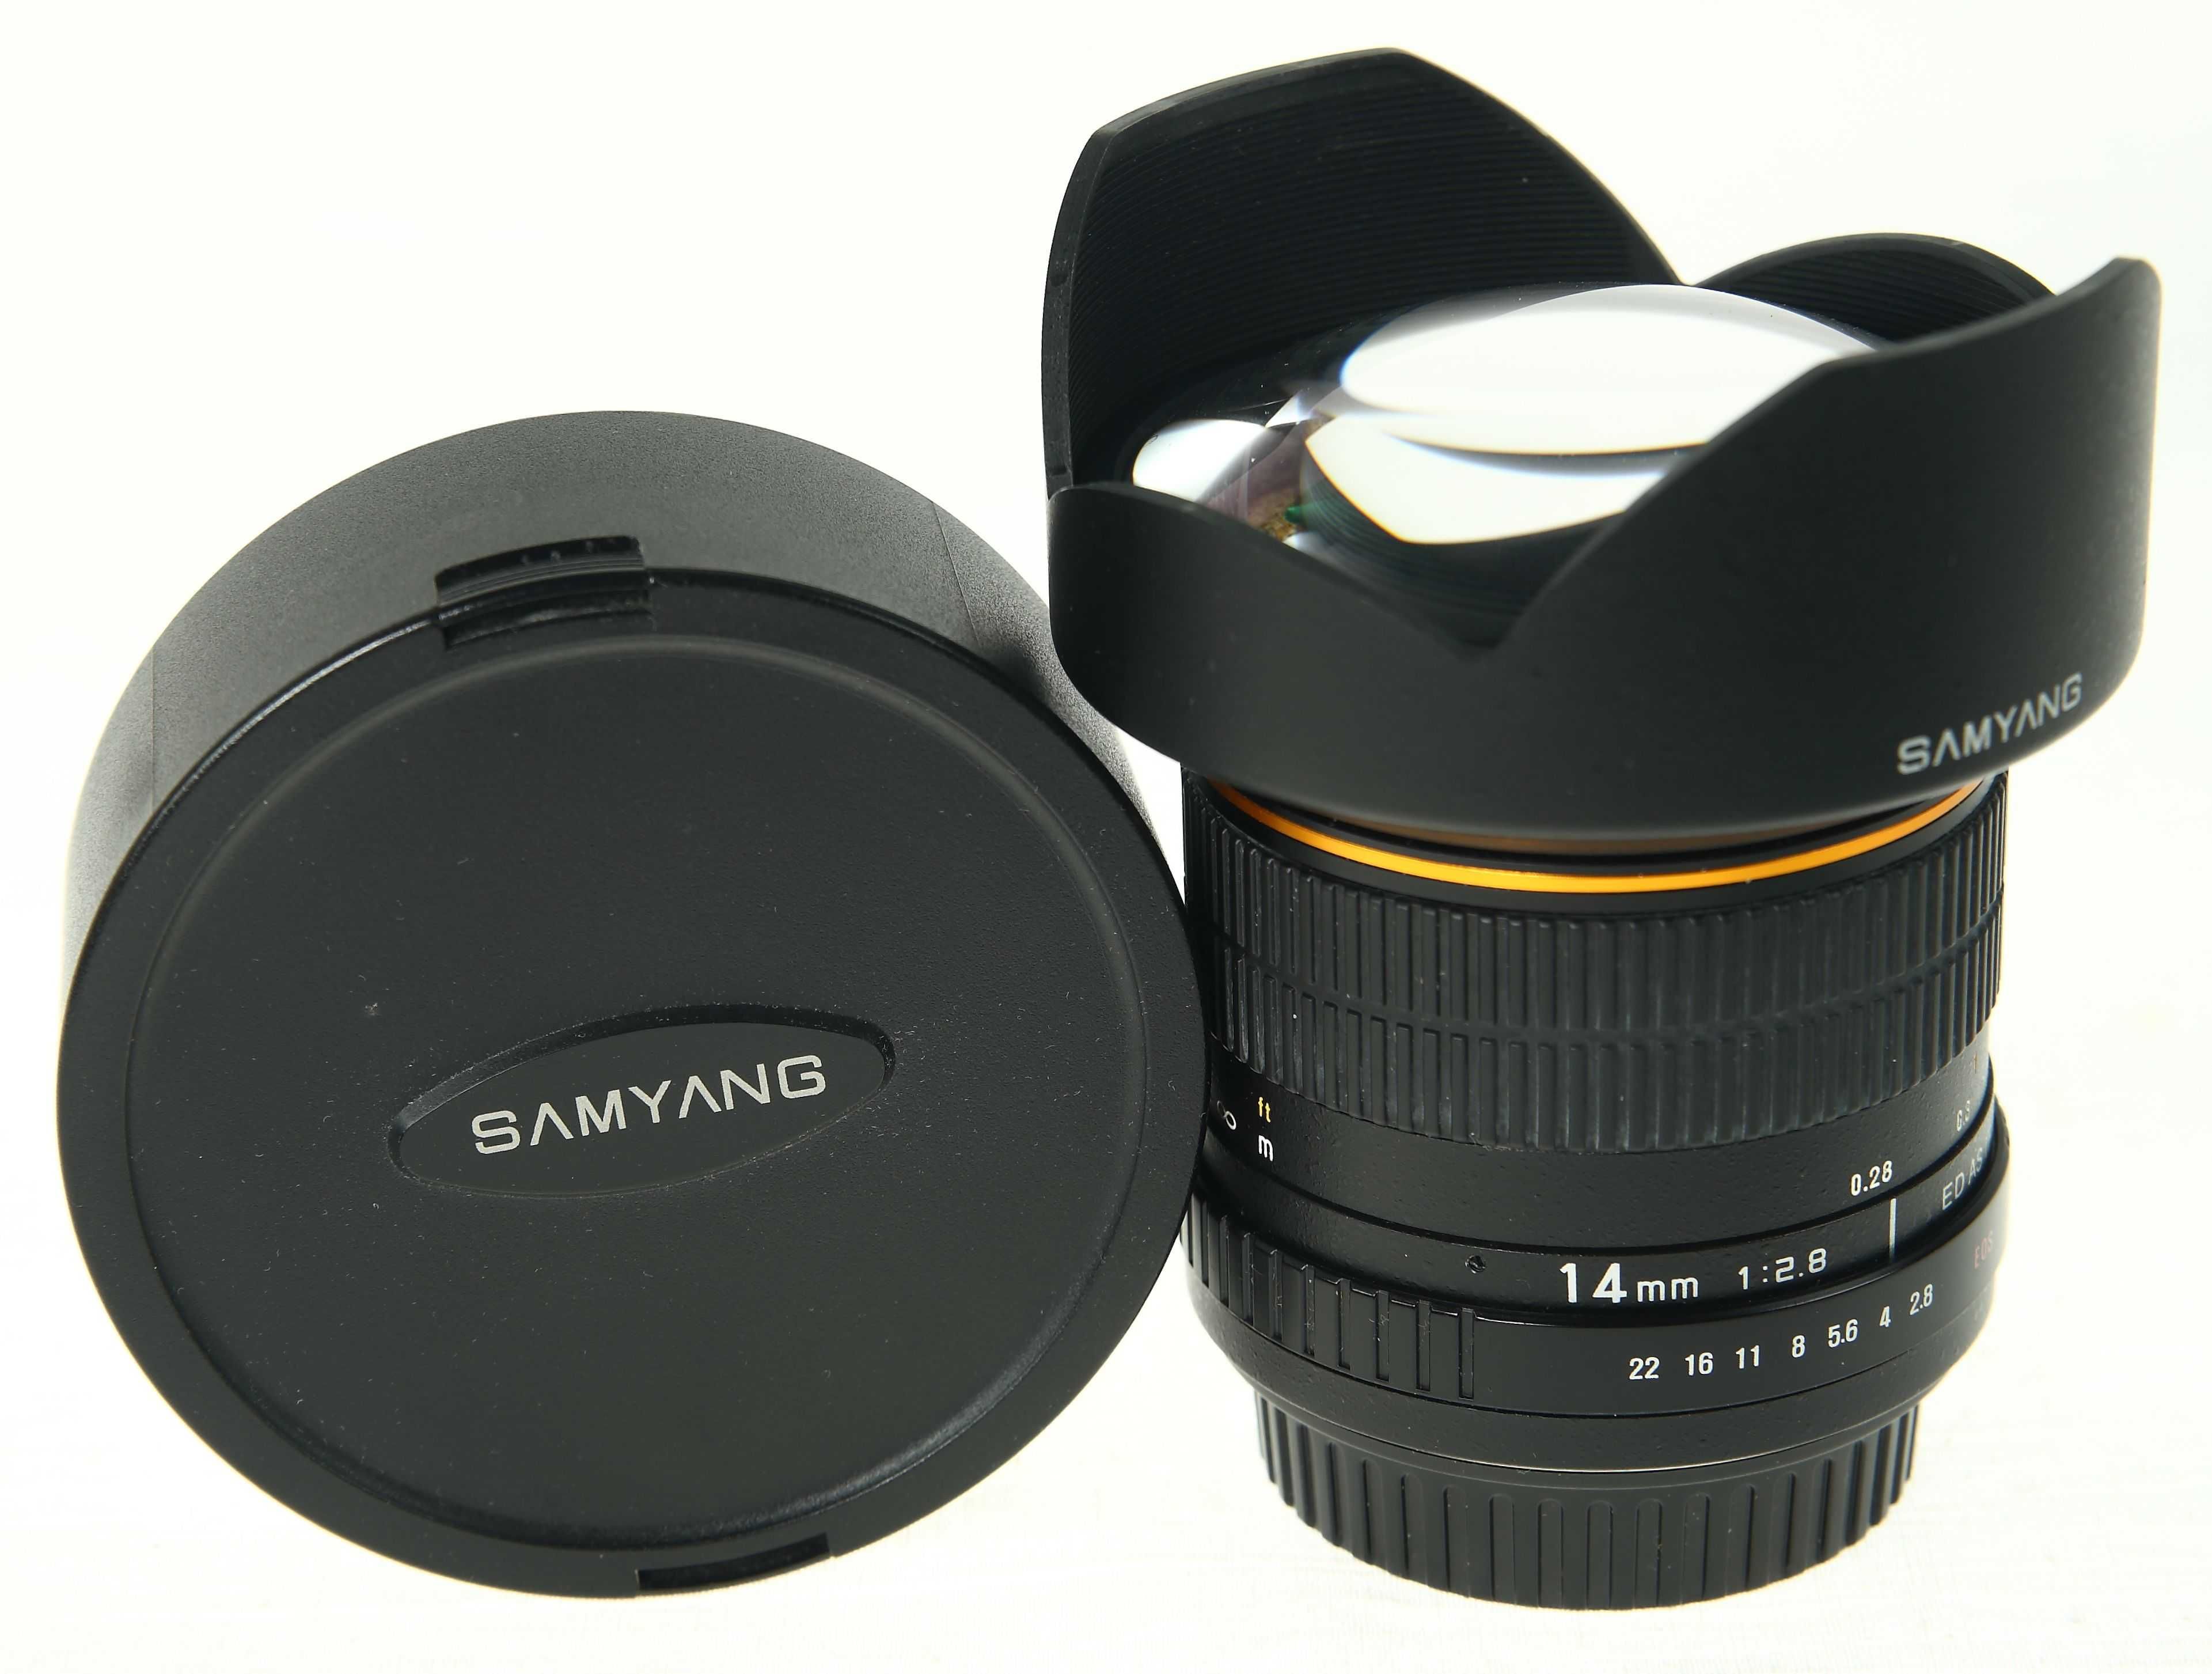 Samyang 14mm f/2.8 ED AS IF UMC for Canon